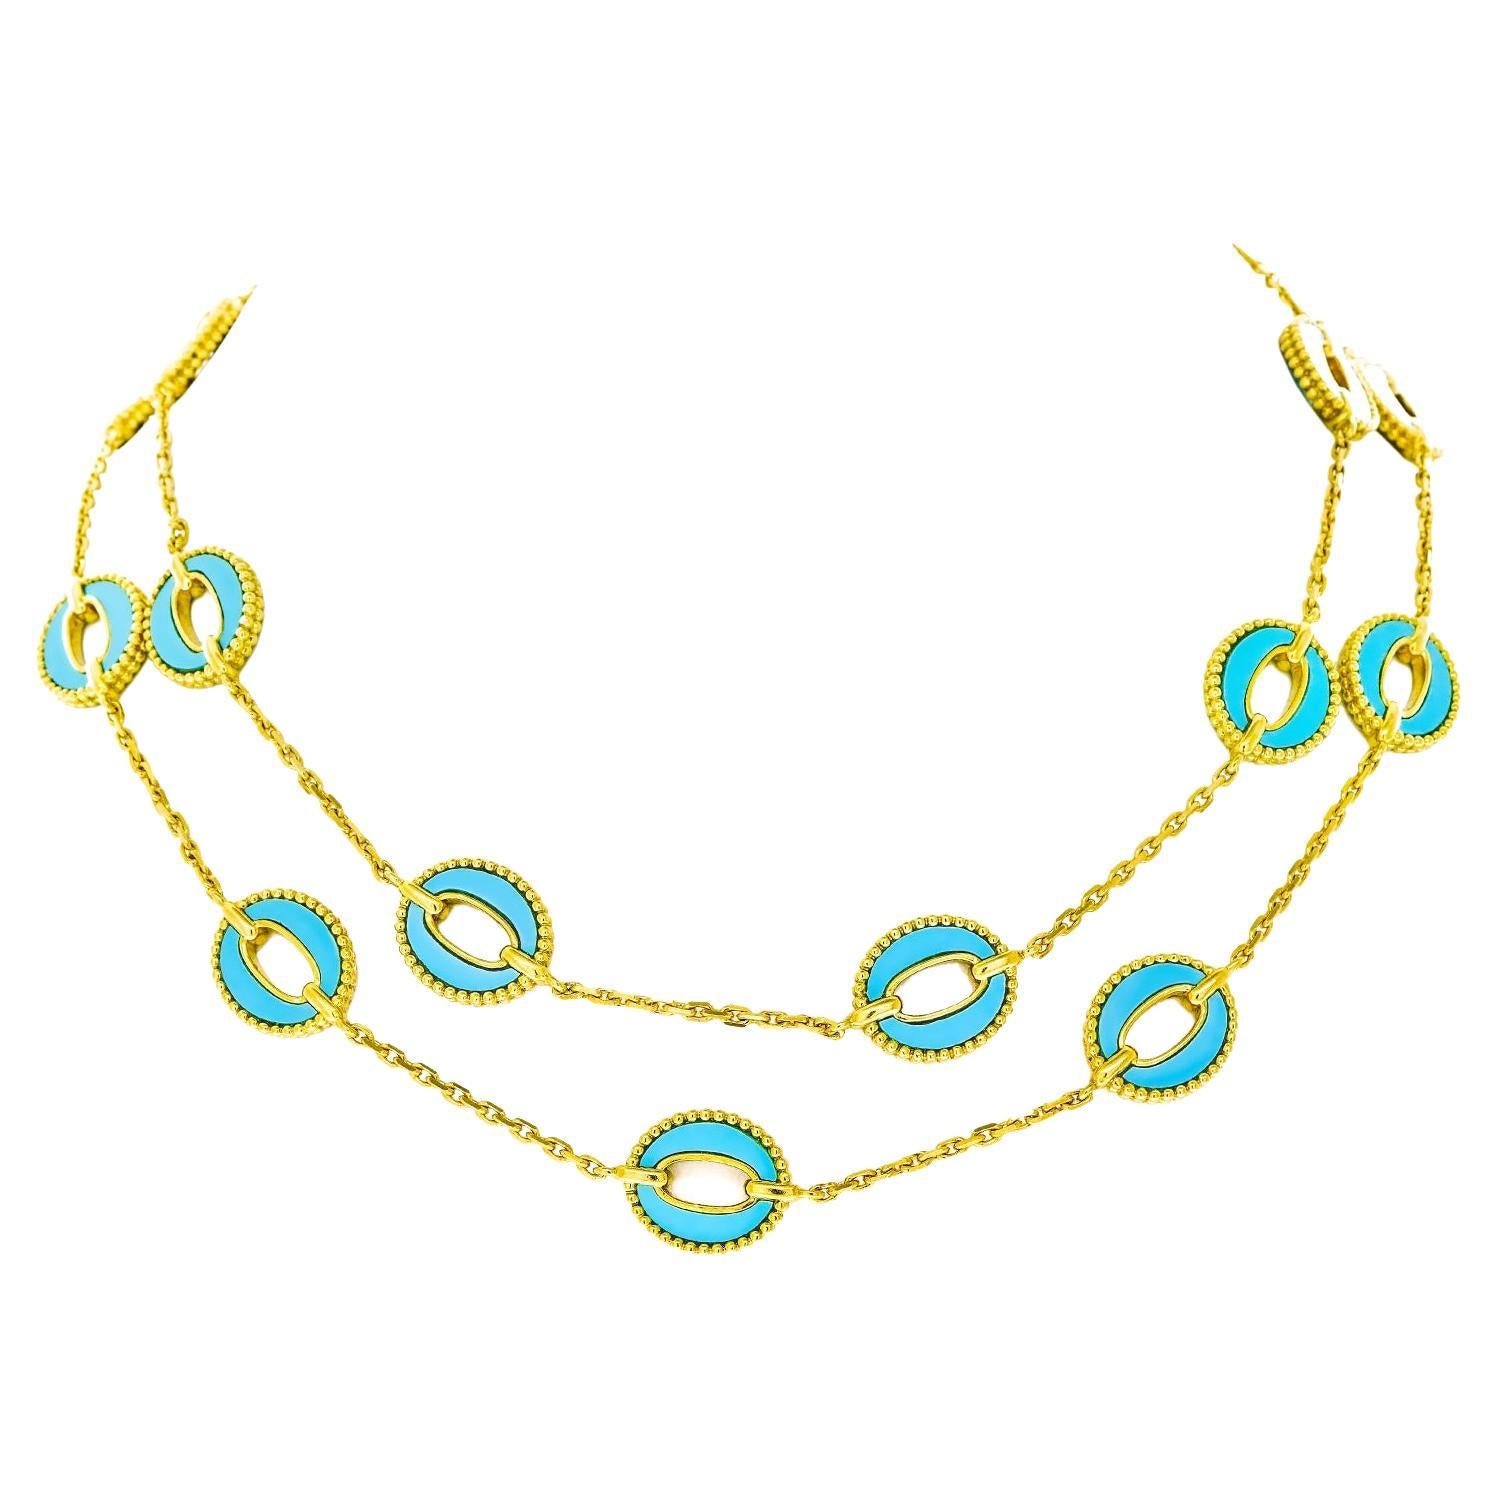 Pair of Turquoise-Set Gold Necklaces